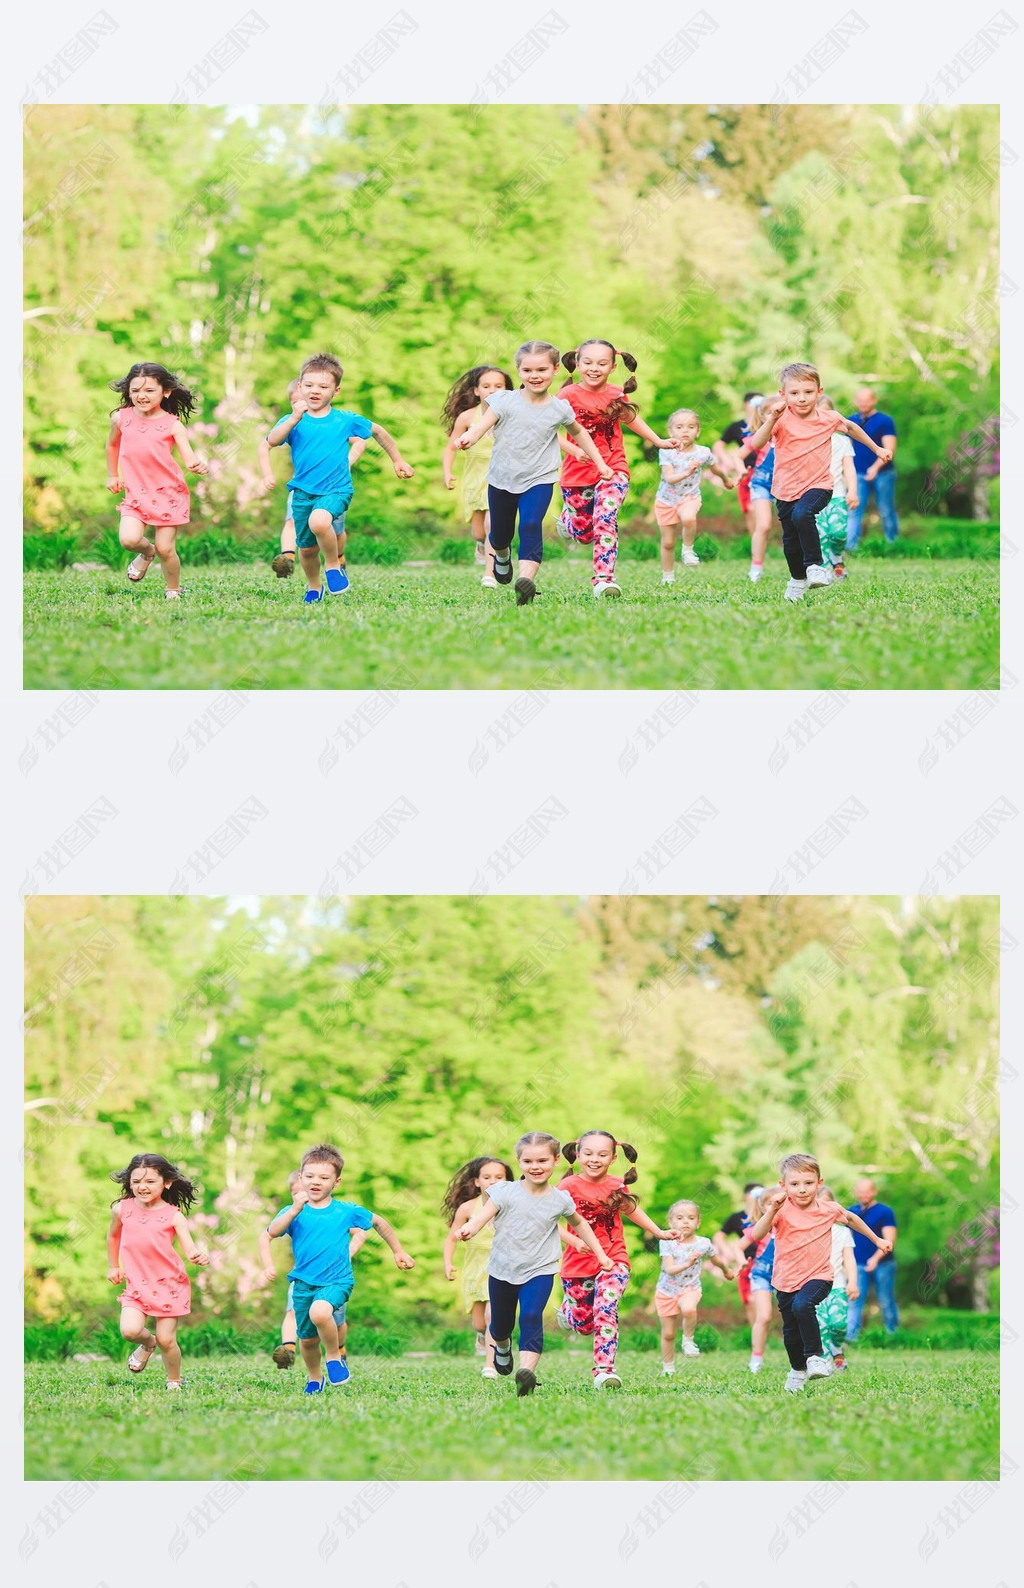 Many different kids, boys and girls running in the park on sunny summer day in casual clothes.